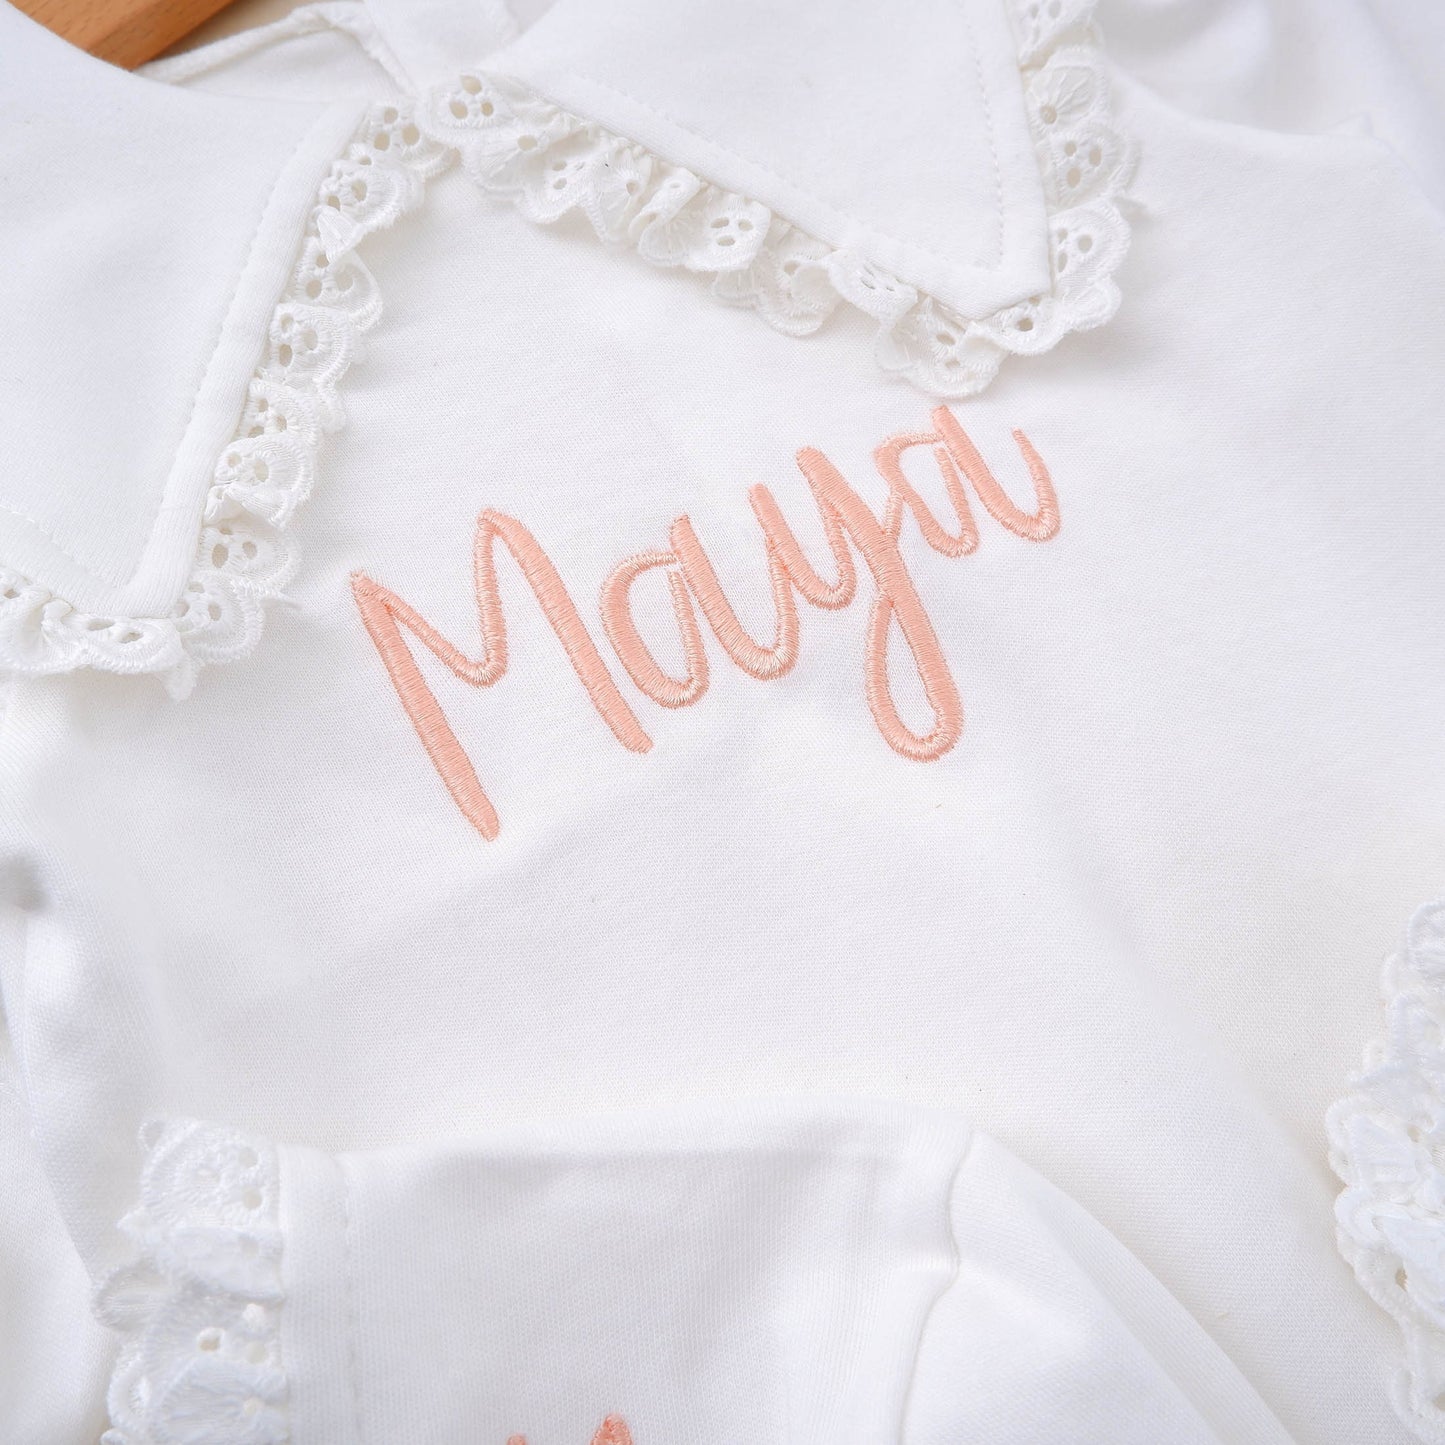 Personalized Coming Home Outfit, Customized Baby Girl Hospital Outfit, Newborn Girl Coming Home Outfit, Personalized Gift for Newborn